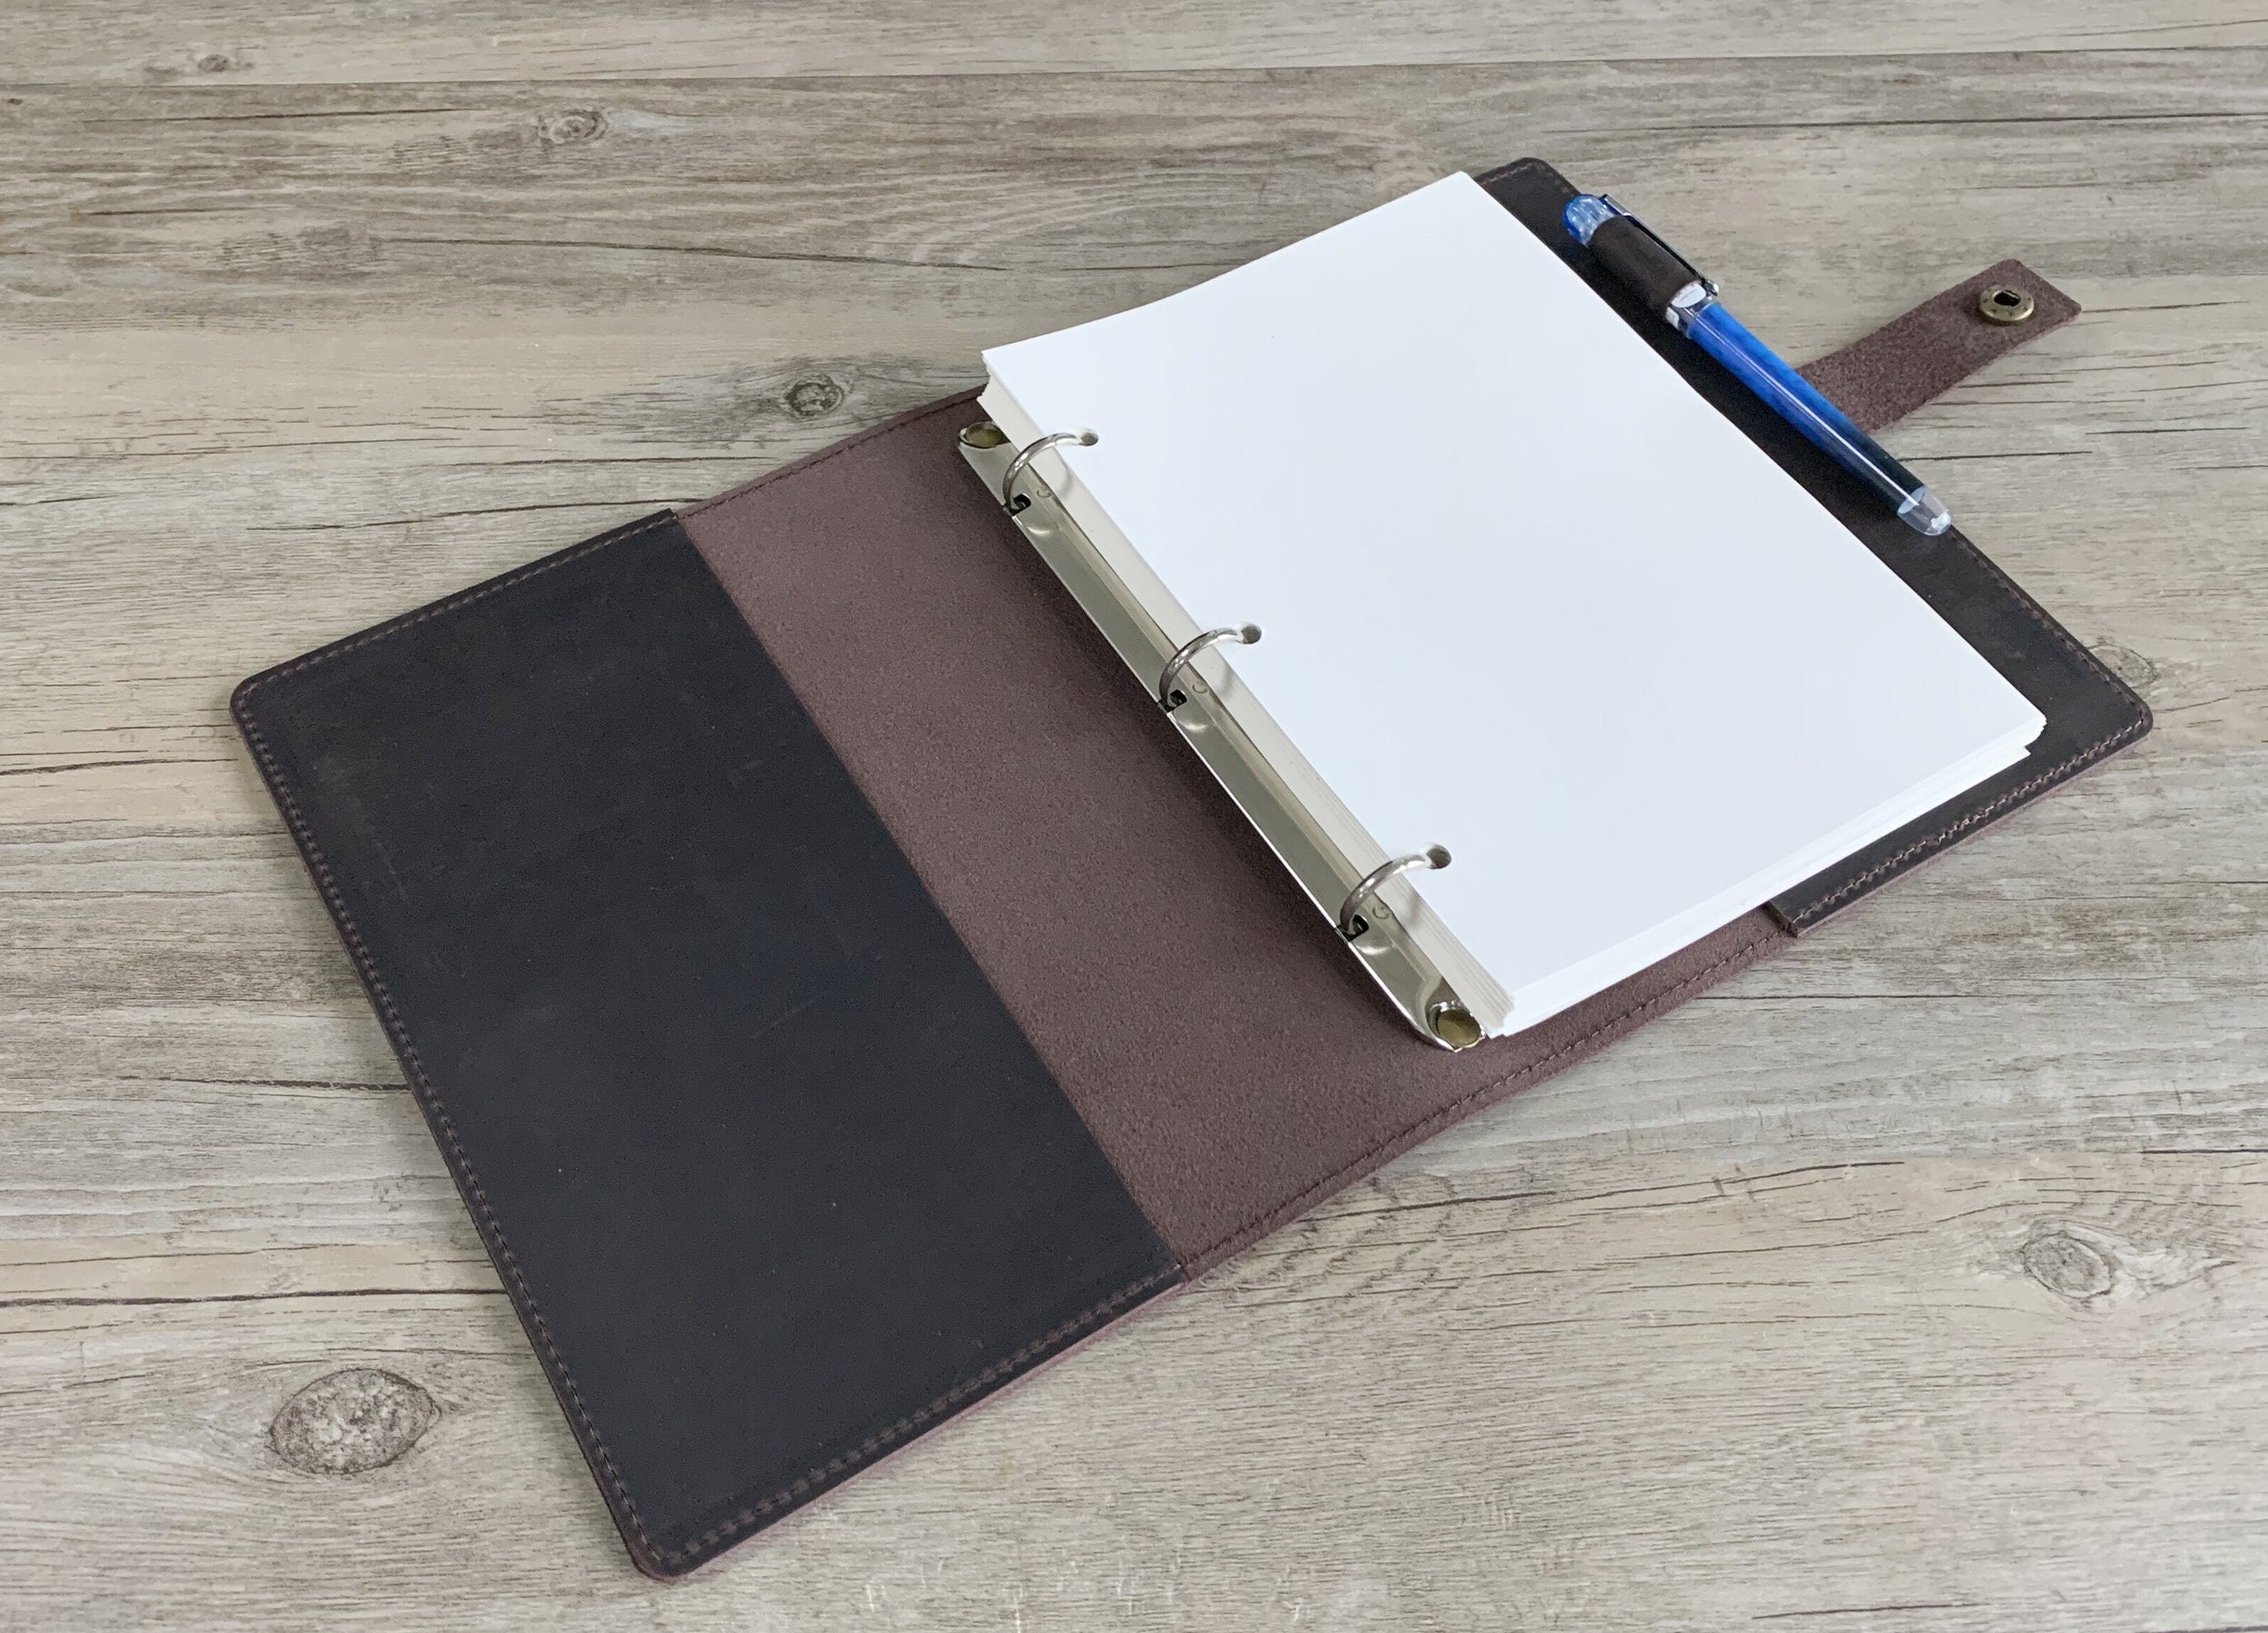 Leather Binder 3-Ring, fit 3 hole 8.5 x 11 refill paper or A5 paper, L -  Extra Studio